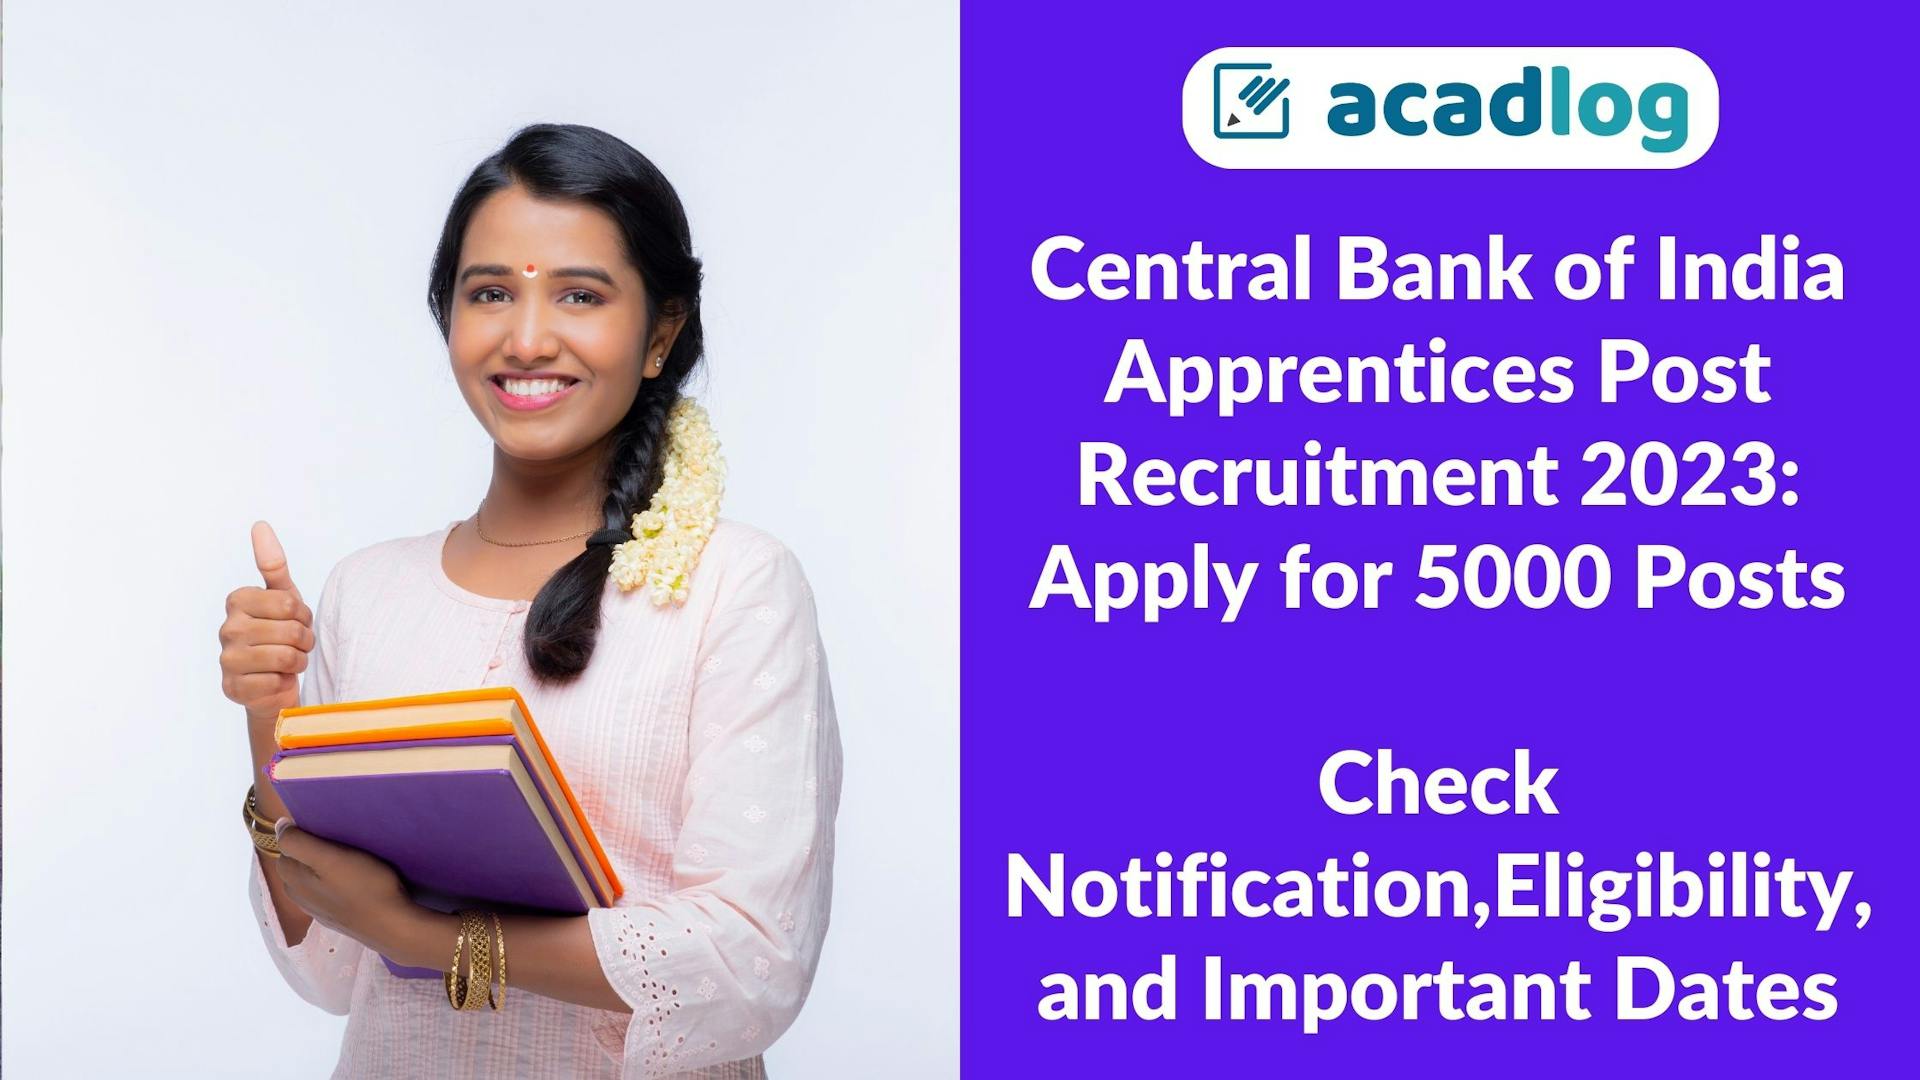 Central Bank of India Apprentices Recruitment 2023 Apply Online for 5000 Post